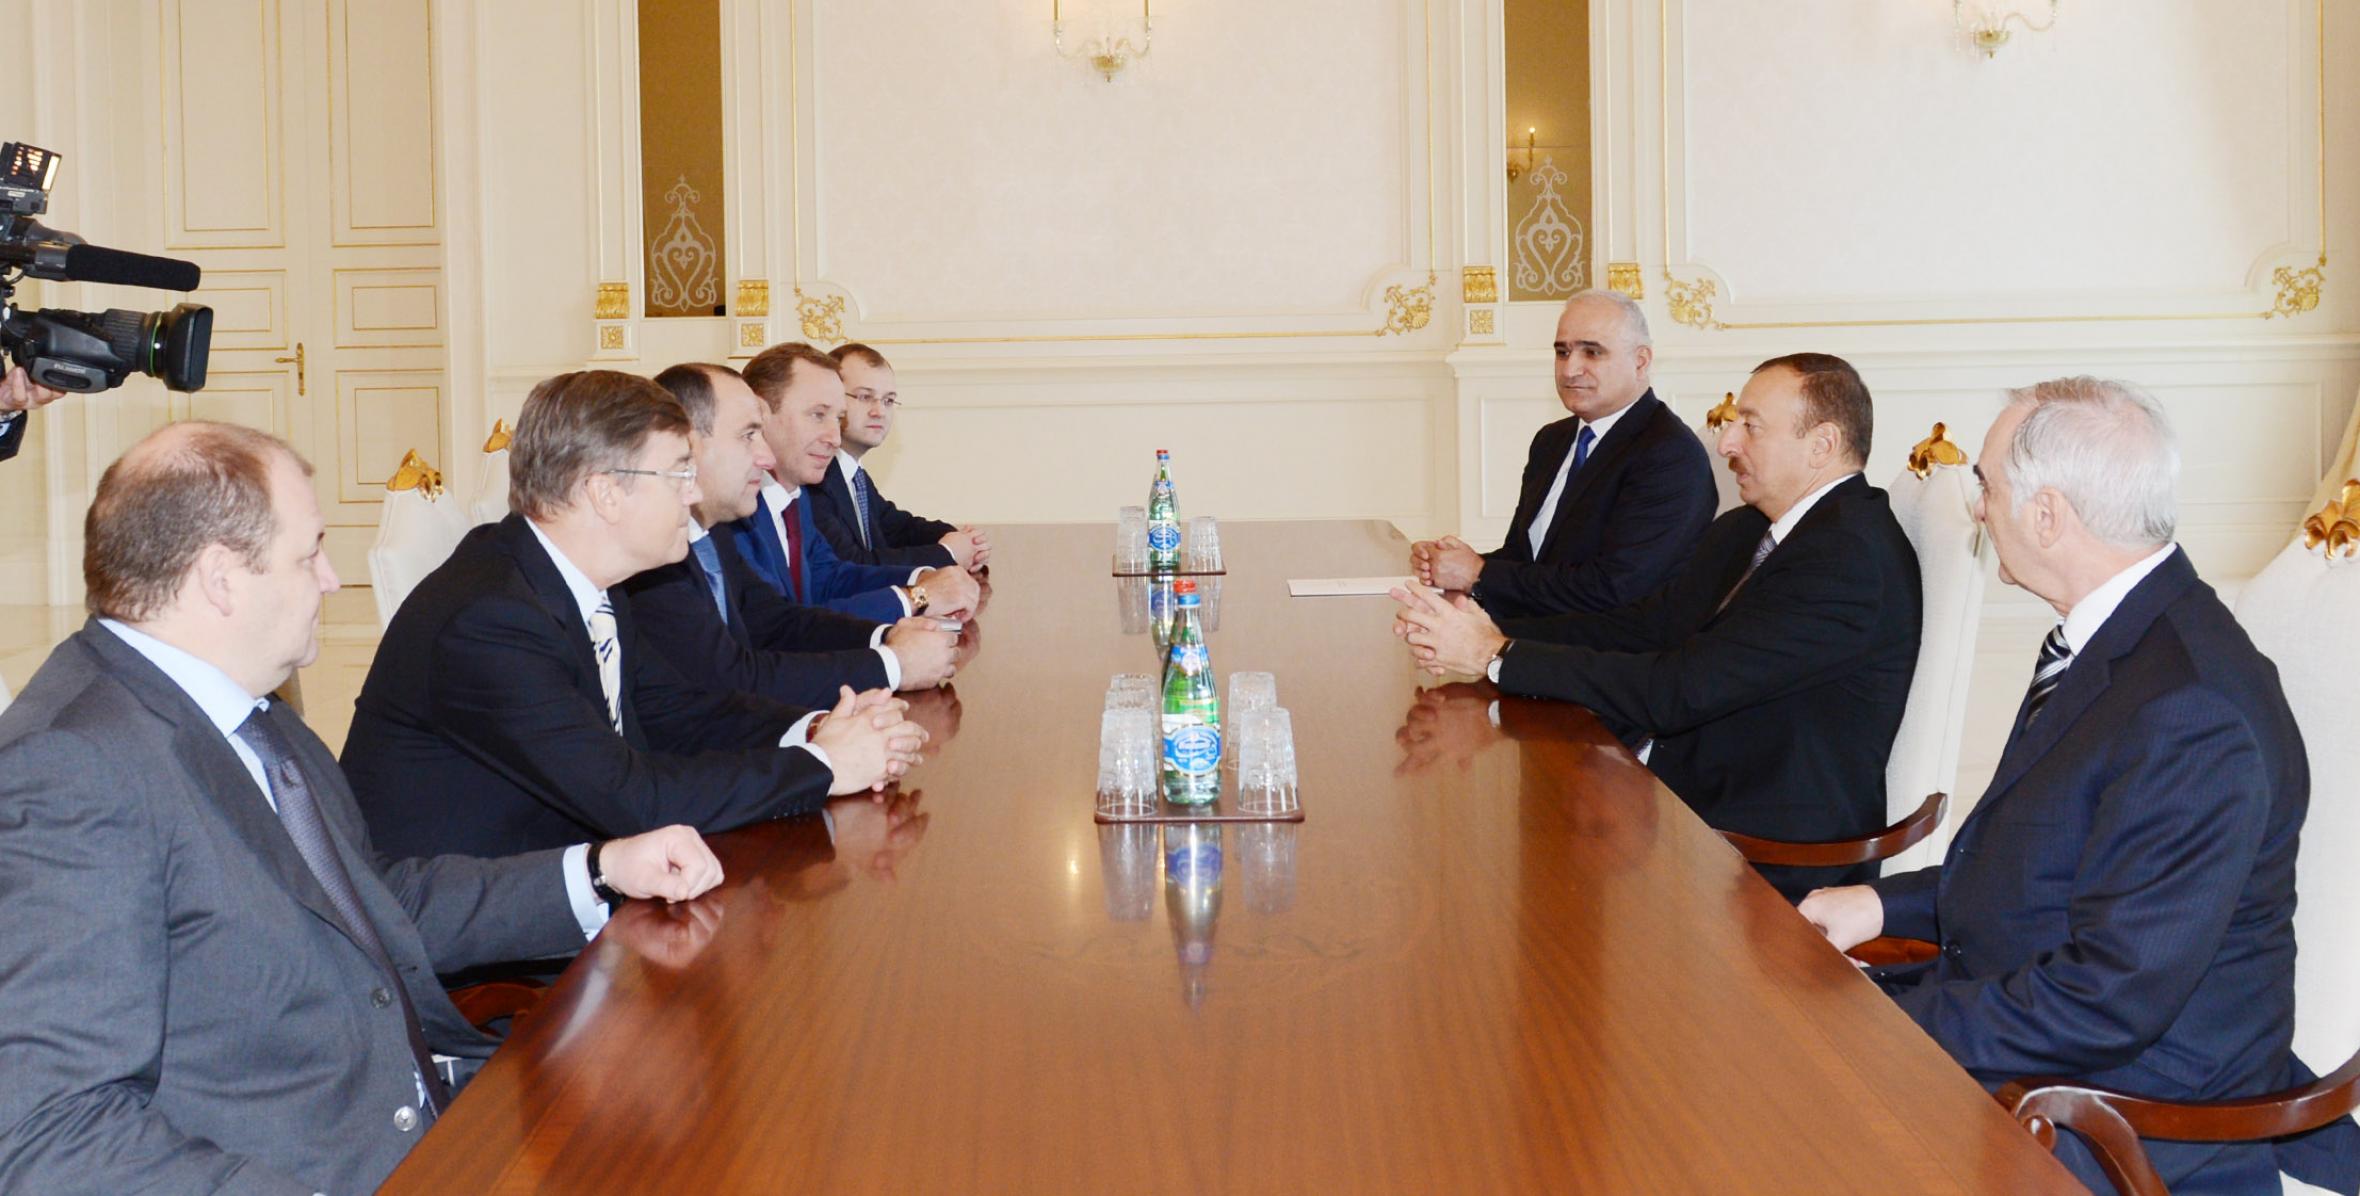 Ilham Aliyev received a delegation led by the head of the Republic of Karachay-Cherkessia of the Russian Federation